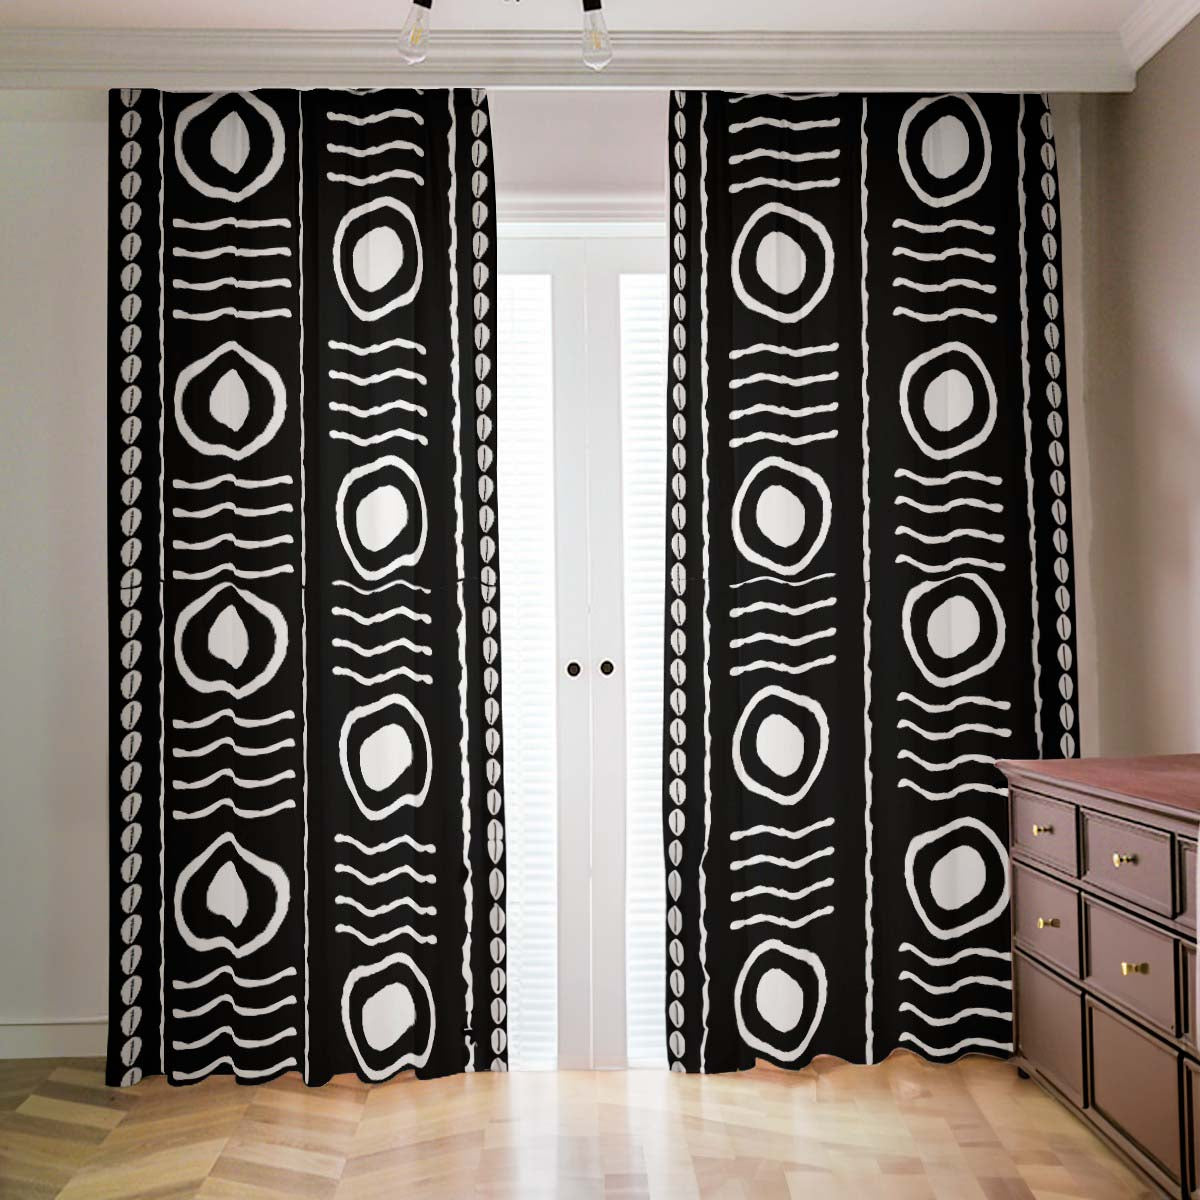 Afrocentric Blackout Curtains Cowrie Print Black & White